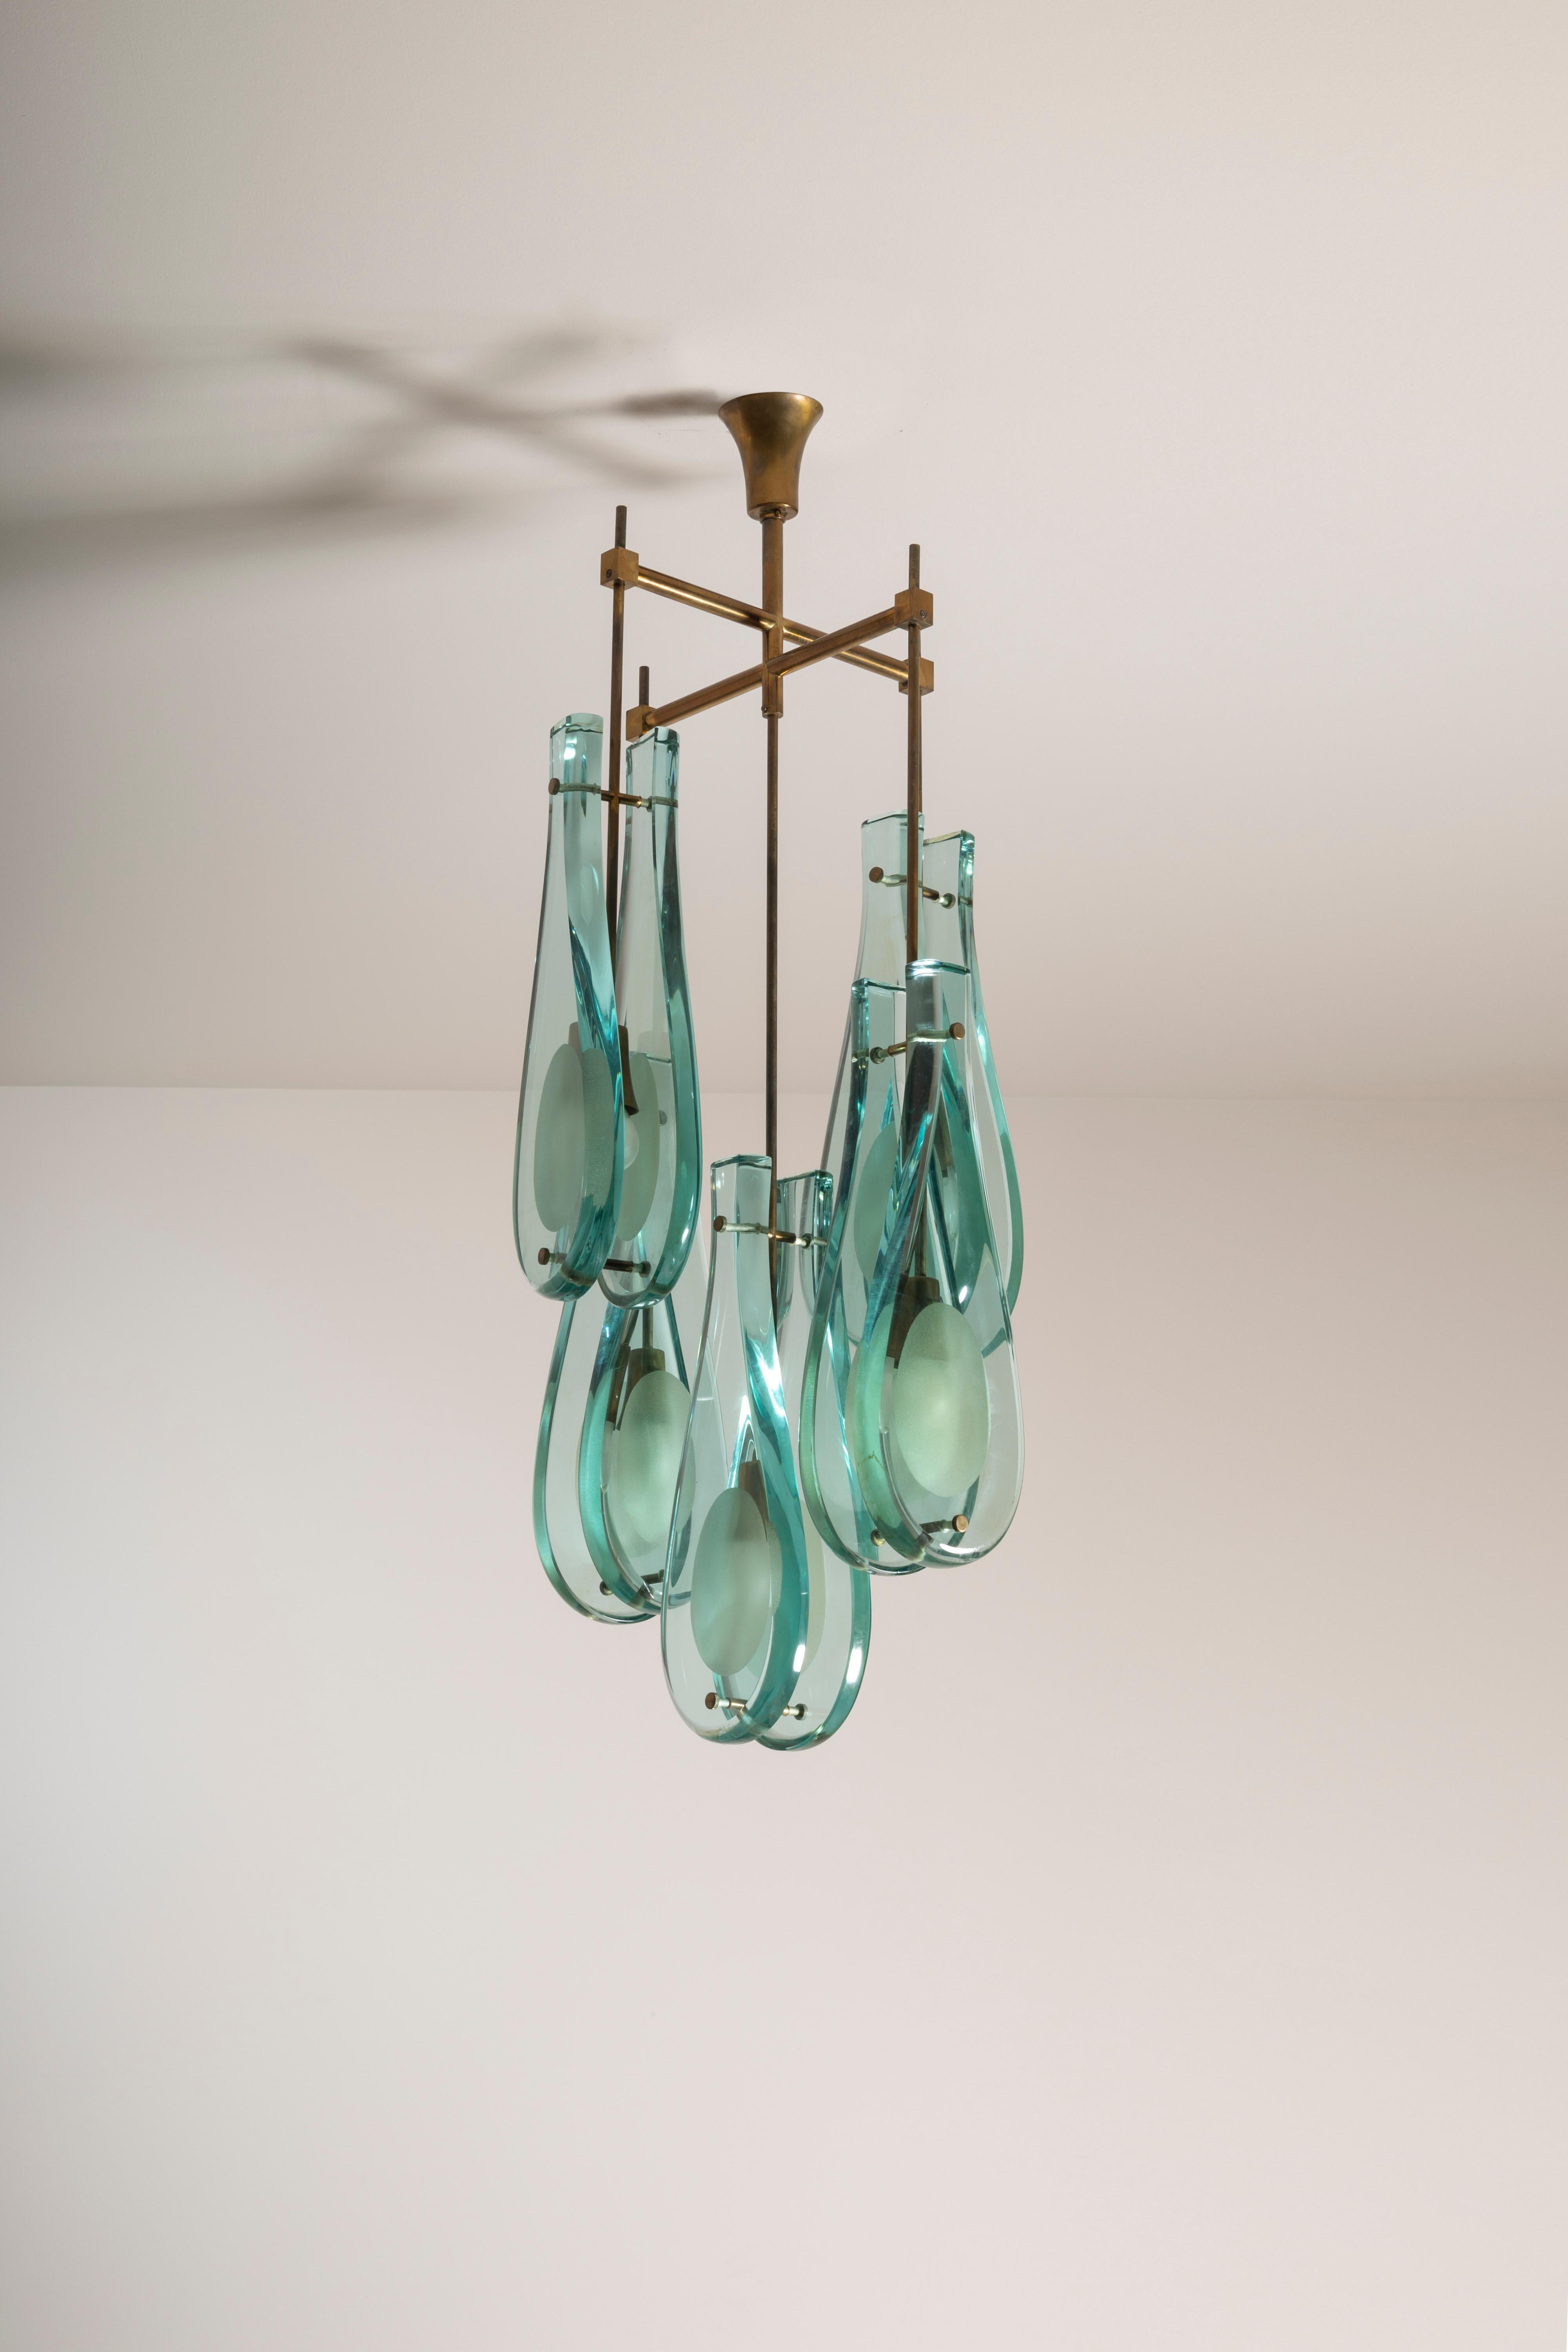 Italian Max Ingrand model 2338 glass and brass chandelier by Fontana Arte, Italy, 1960s For Sale